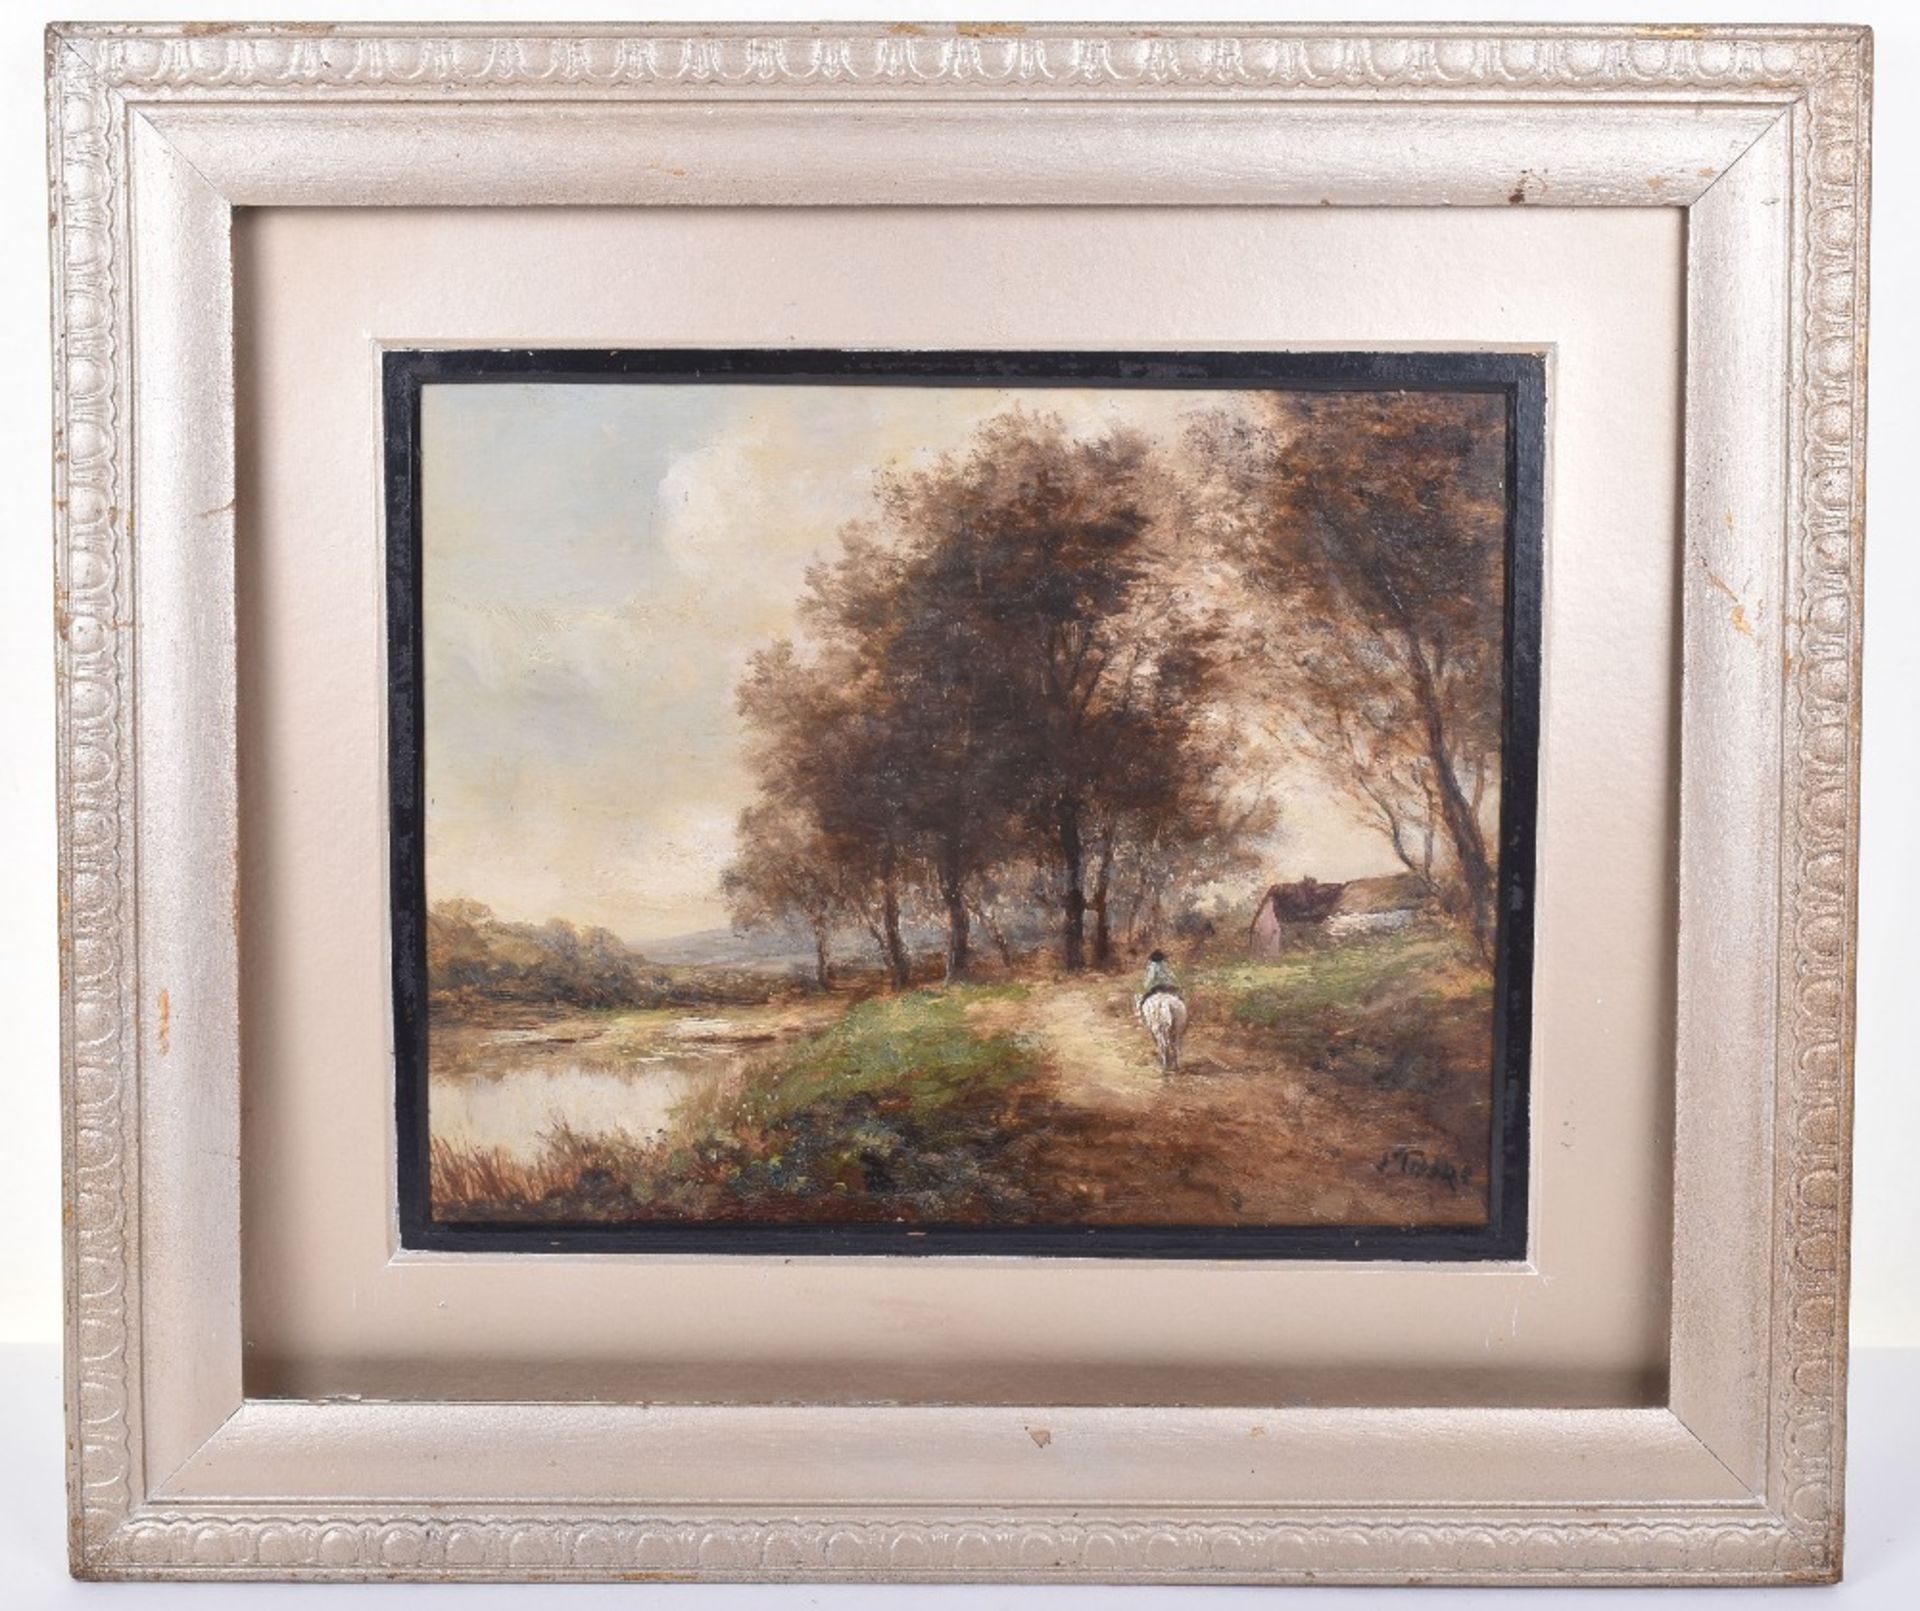 Three Joseph Thors (1843-1898) oil on boards with country scenes - Image 2 of 4